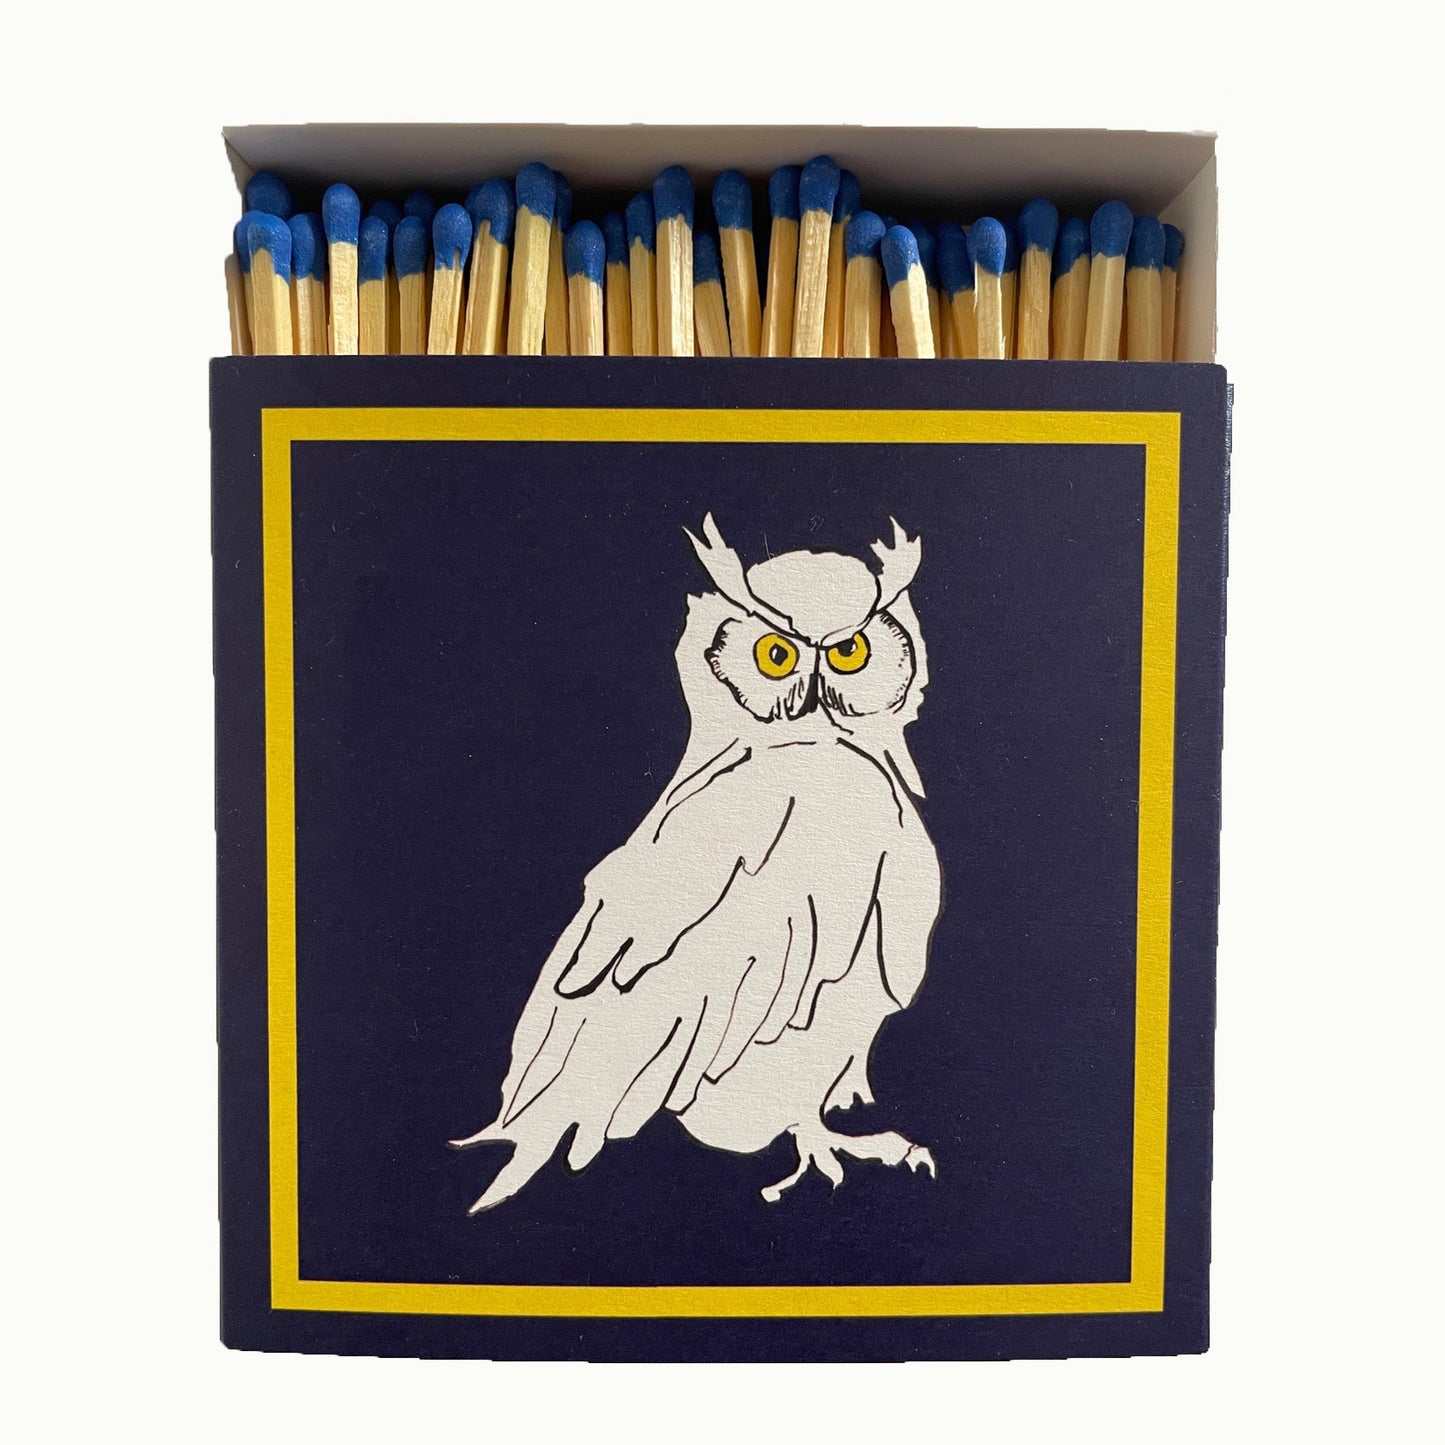 match box with owl on the front